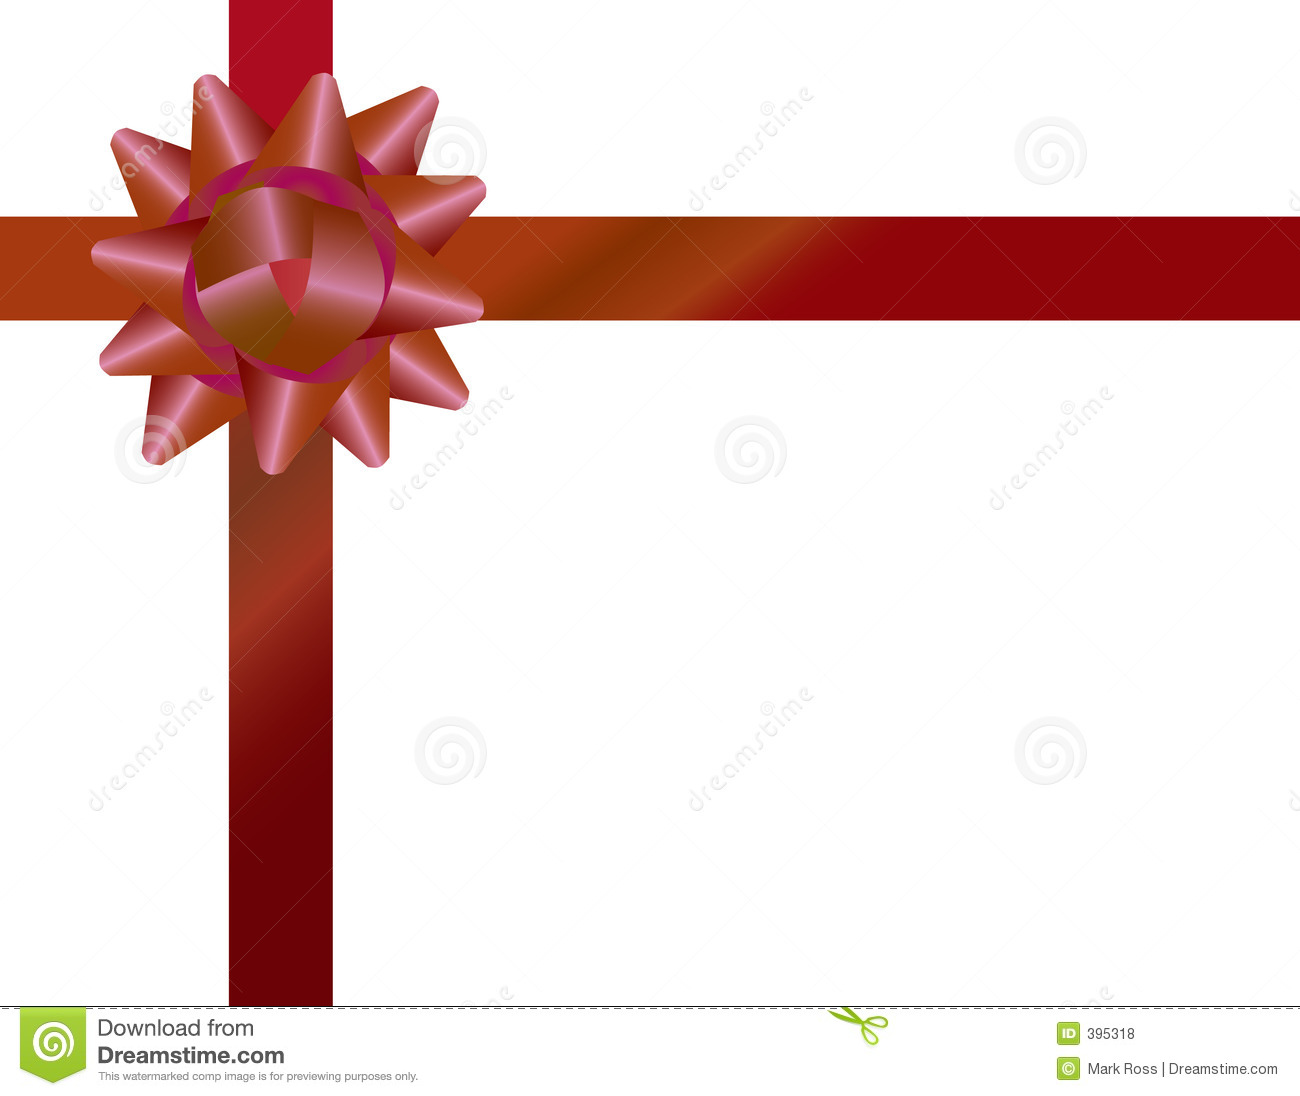 Gift Wrapping Bow And Ribbon Royalty Free Stock Photos   Image  395318